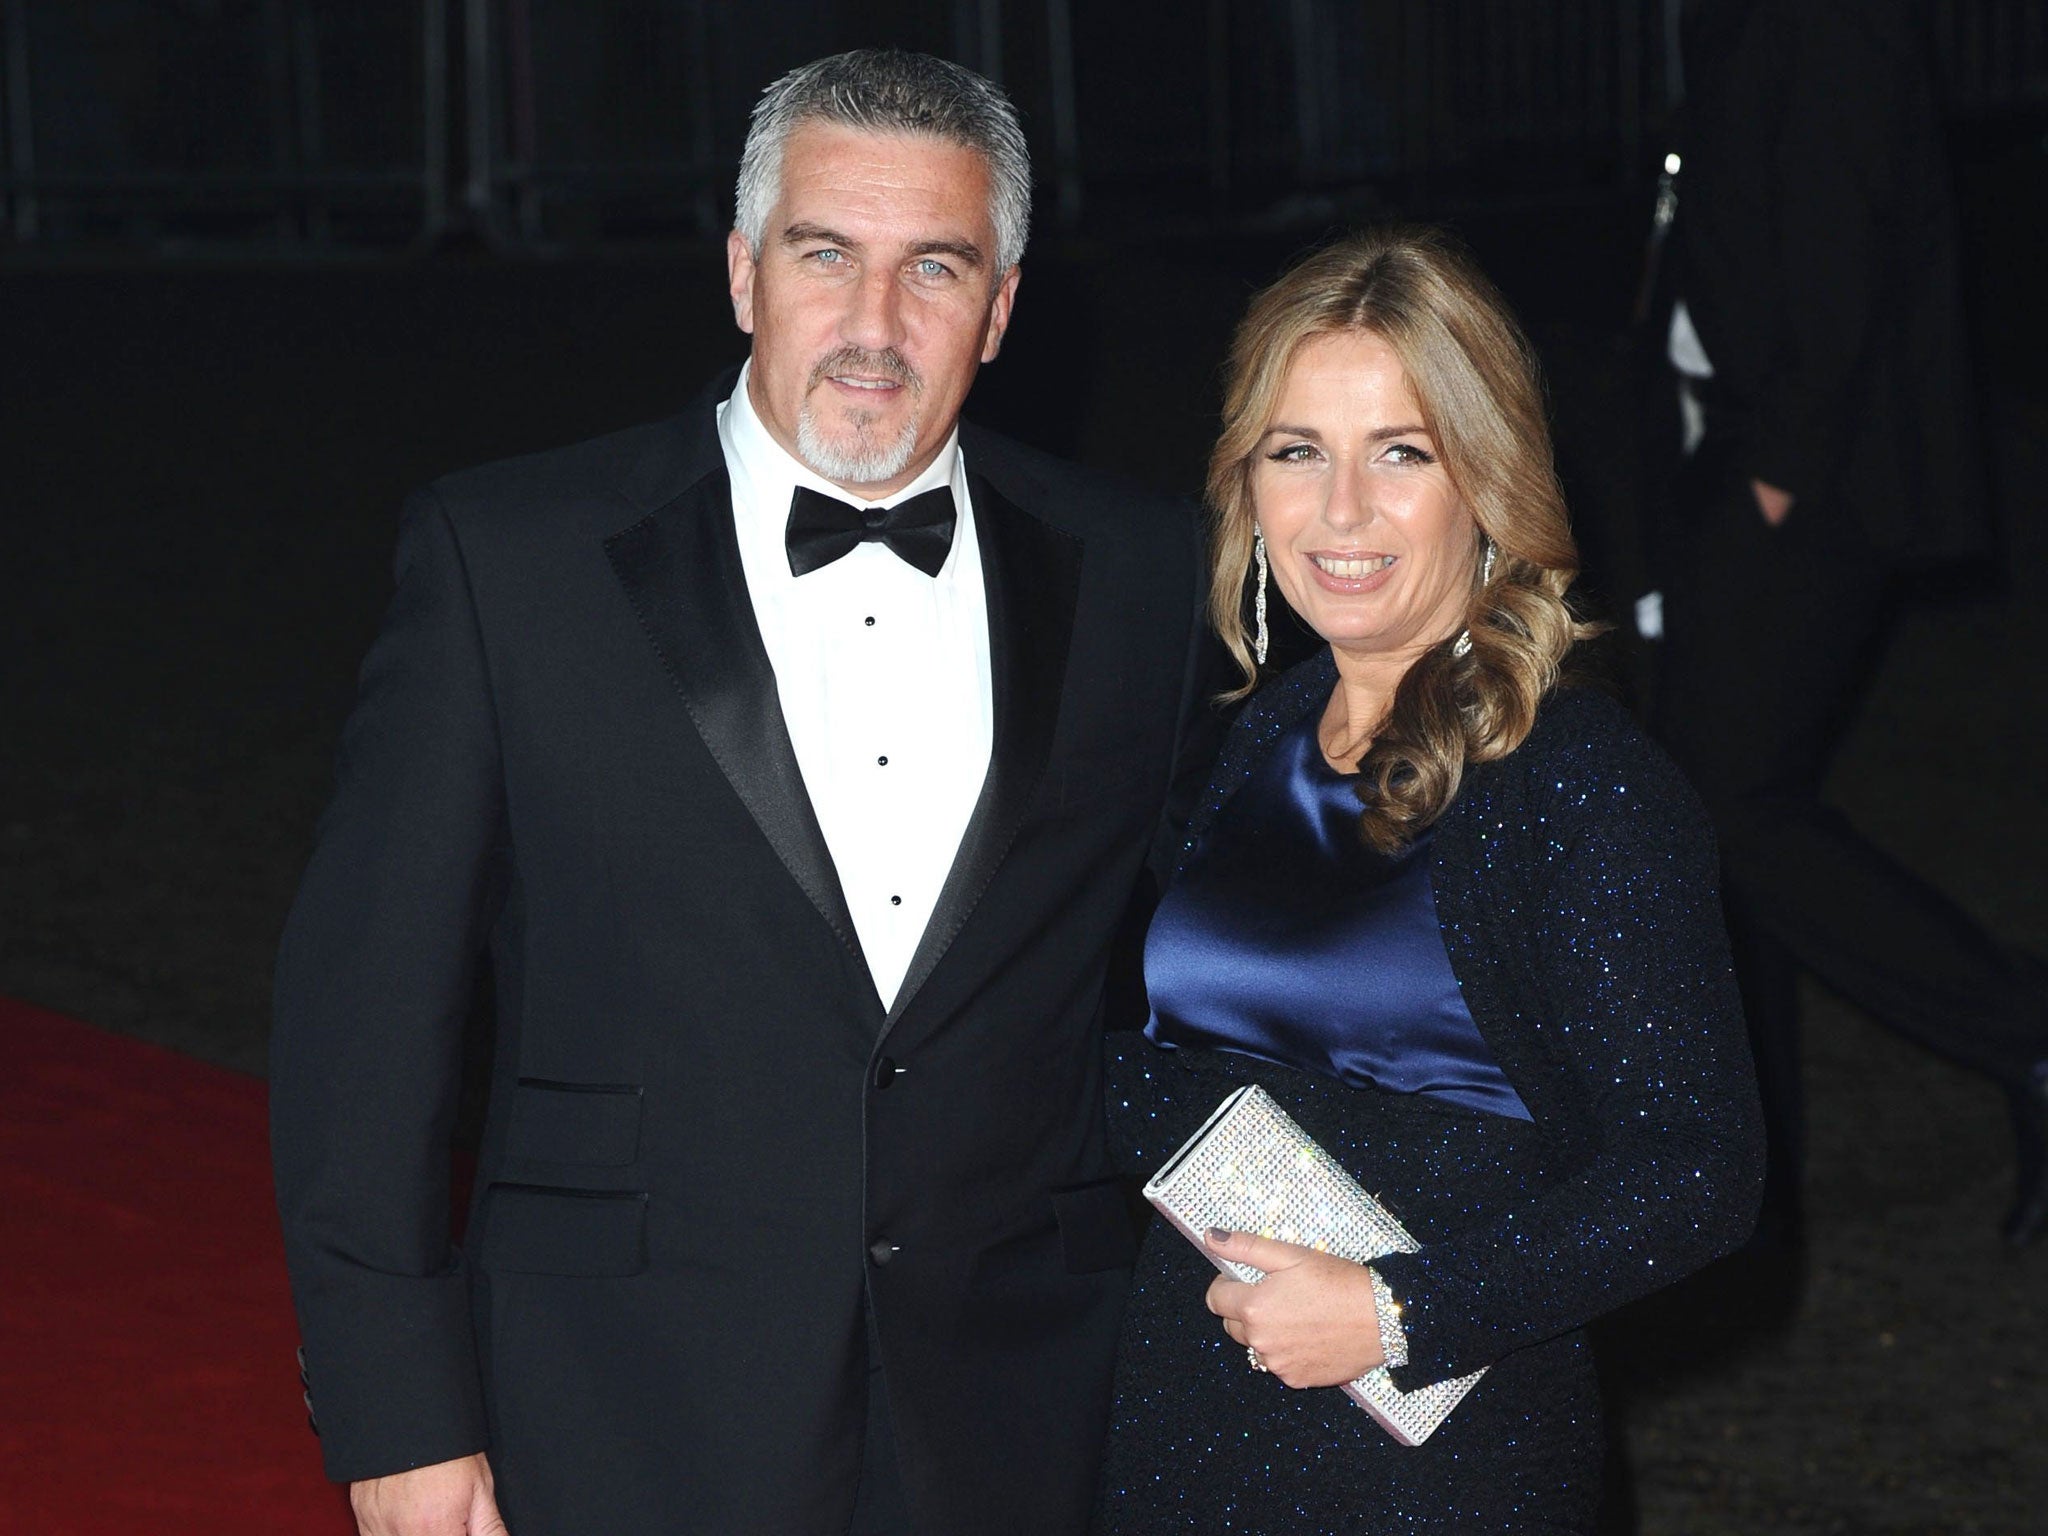 Paul Hollywood and his wife Alexandra have a son